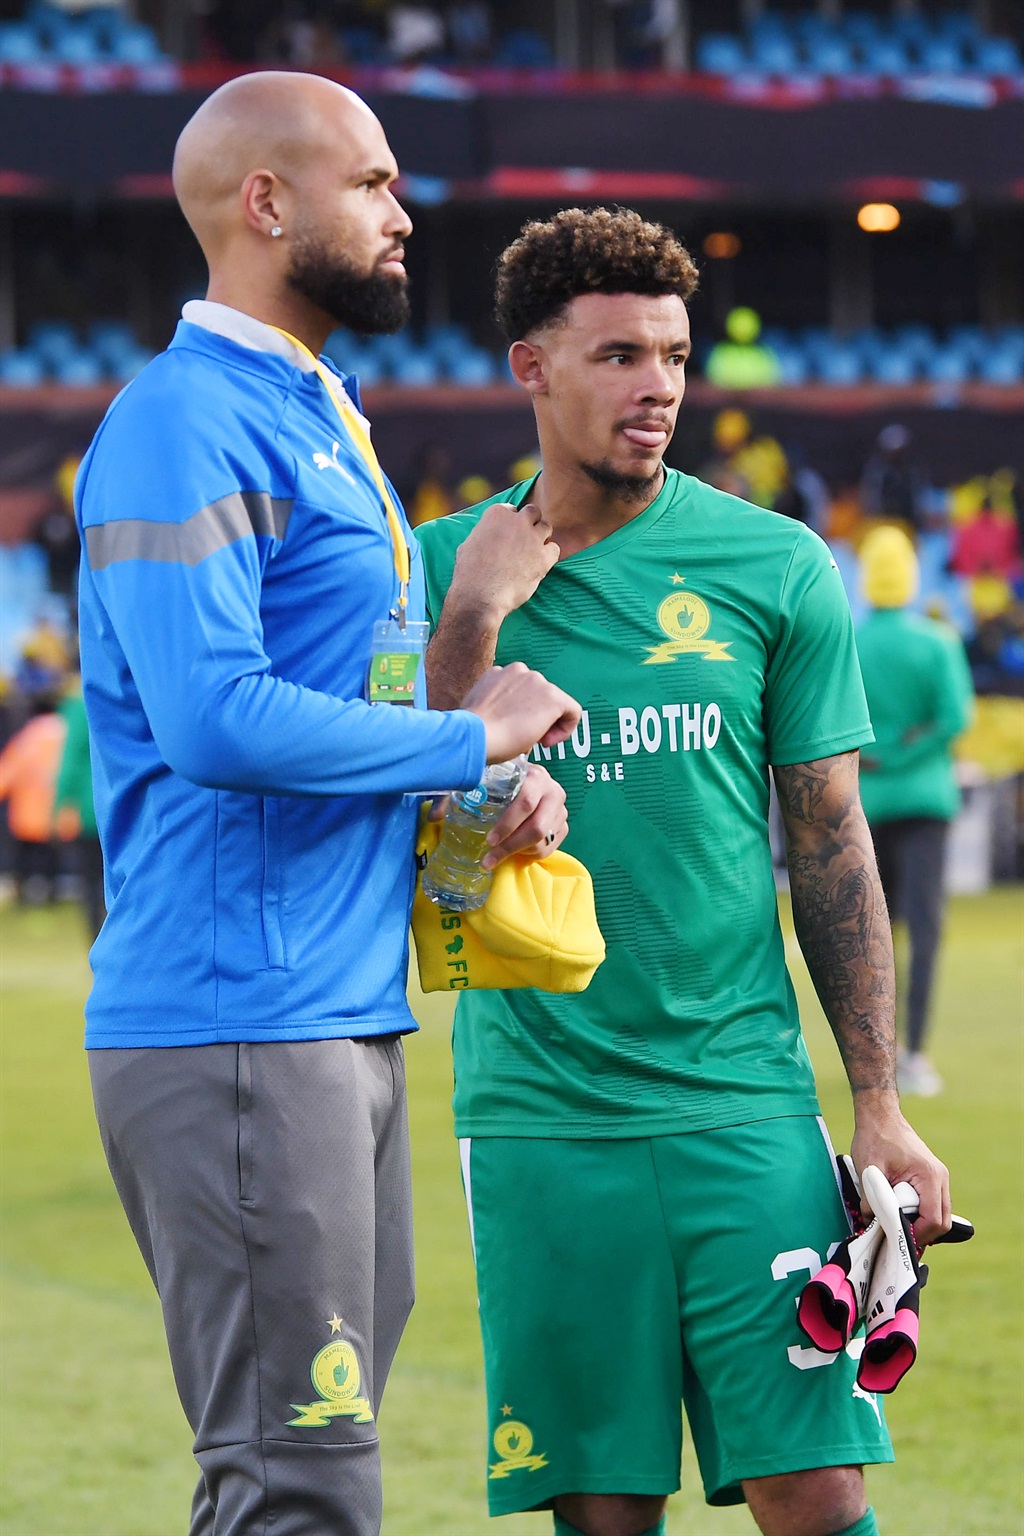 PRETORIA, SOUTH AFRICA - MAY 20: Mamelodi Sundowns players Reyaad Pieterse and Ronwen Williams looks dejected during the CAF Champions League match between Mamelodi Sundowns and Wydad Athletic Club at Loftus Stadium on May 20, 2023 in Pretoria, South Africa. (Photo by Lefty Shivambu/Gallo Images)